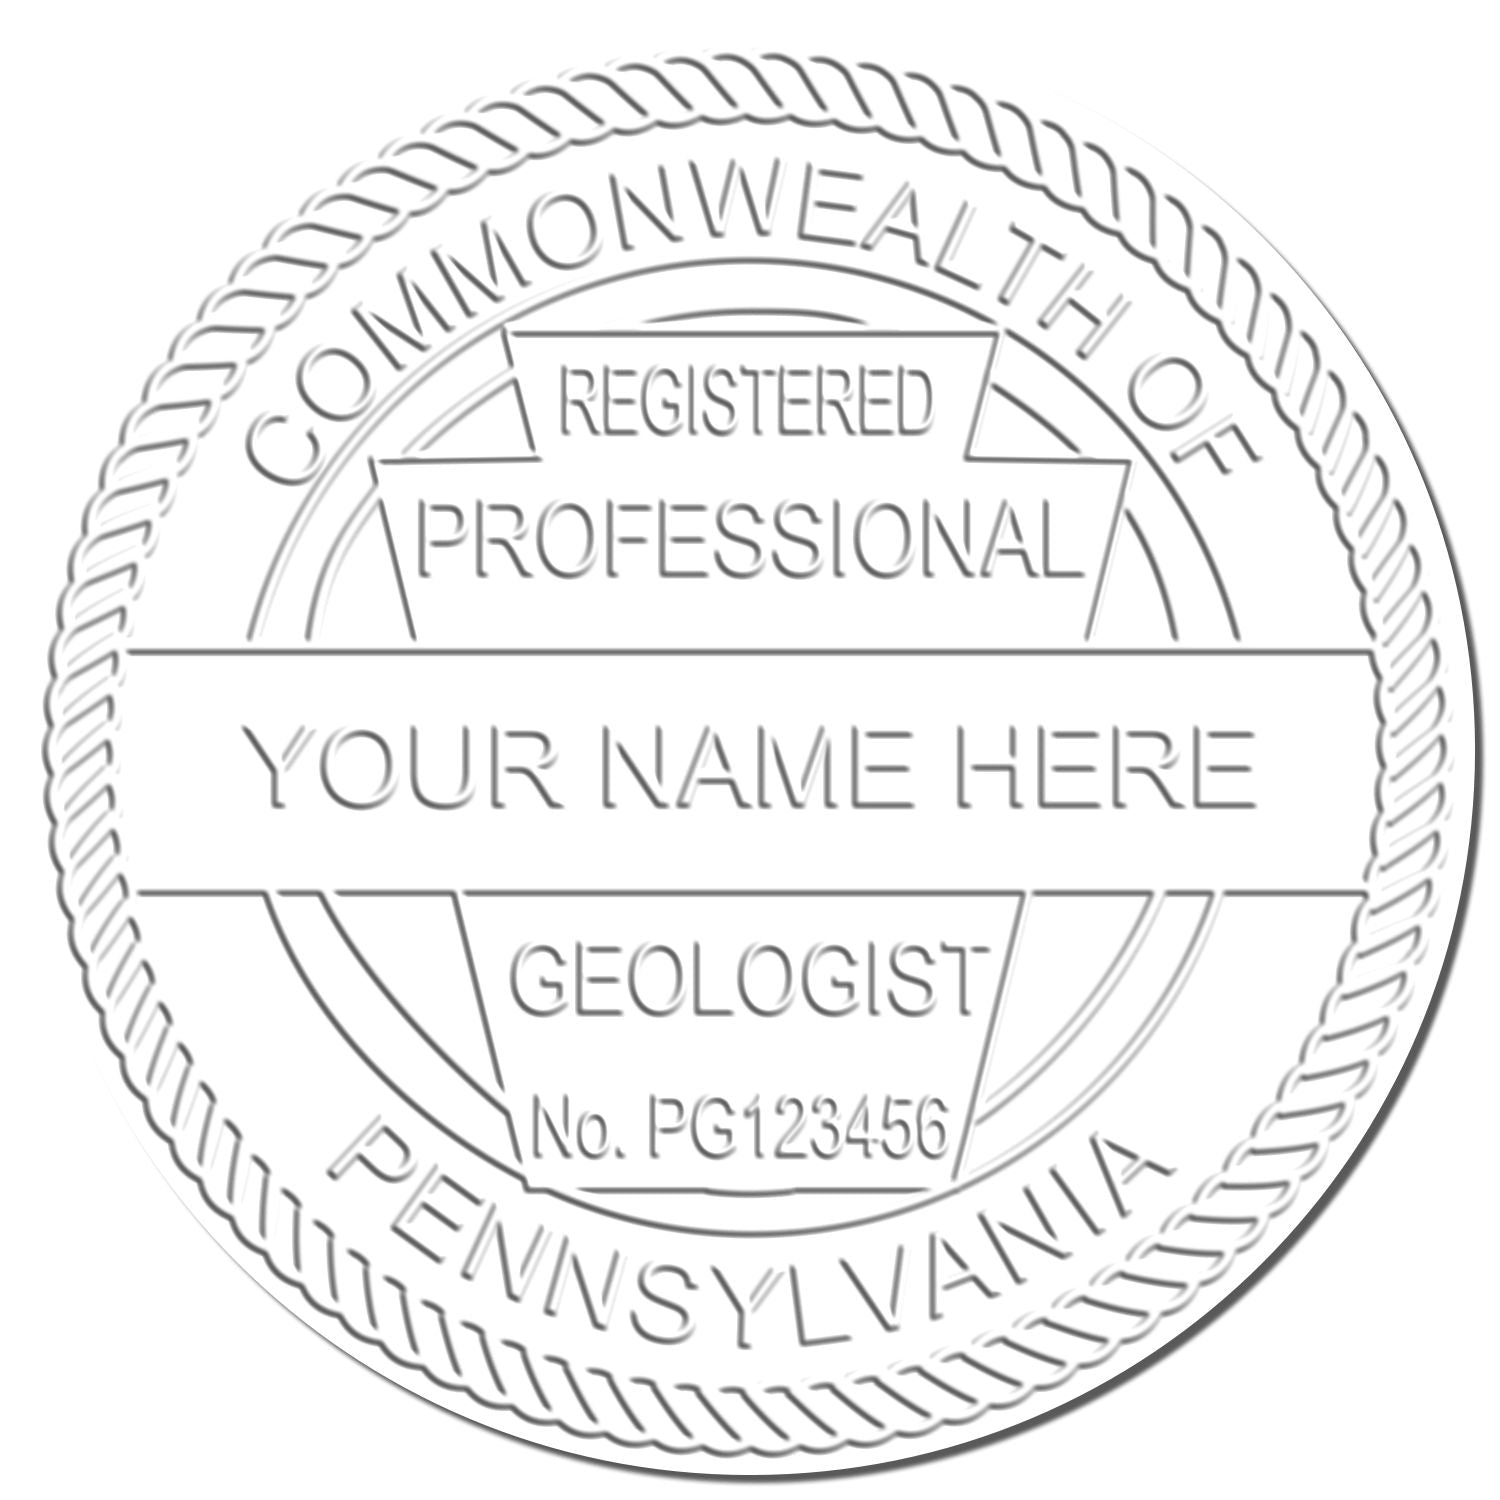 A stamped imprint of the Gift Pennsylvania Geologist Seal in this stylish lifestyle photo, setting the tone for a unique and personalized product.